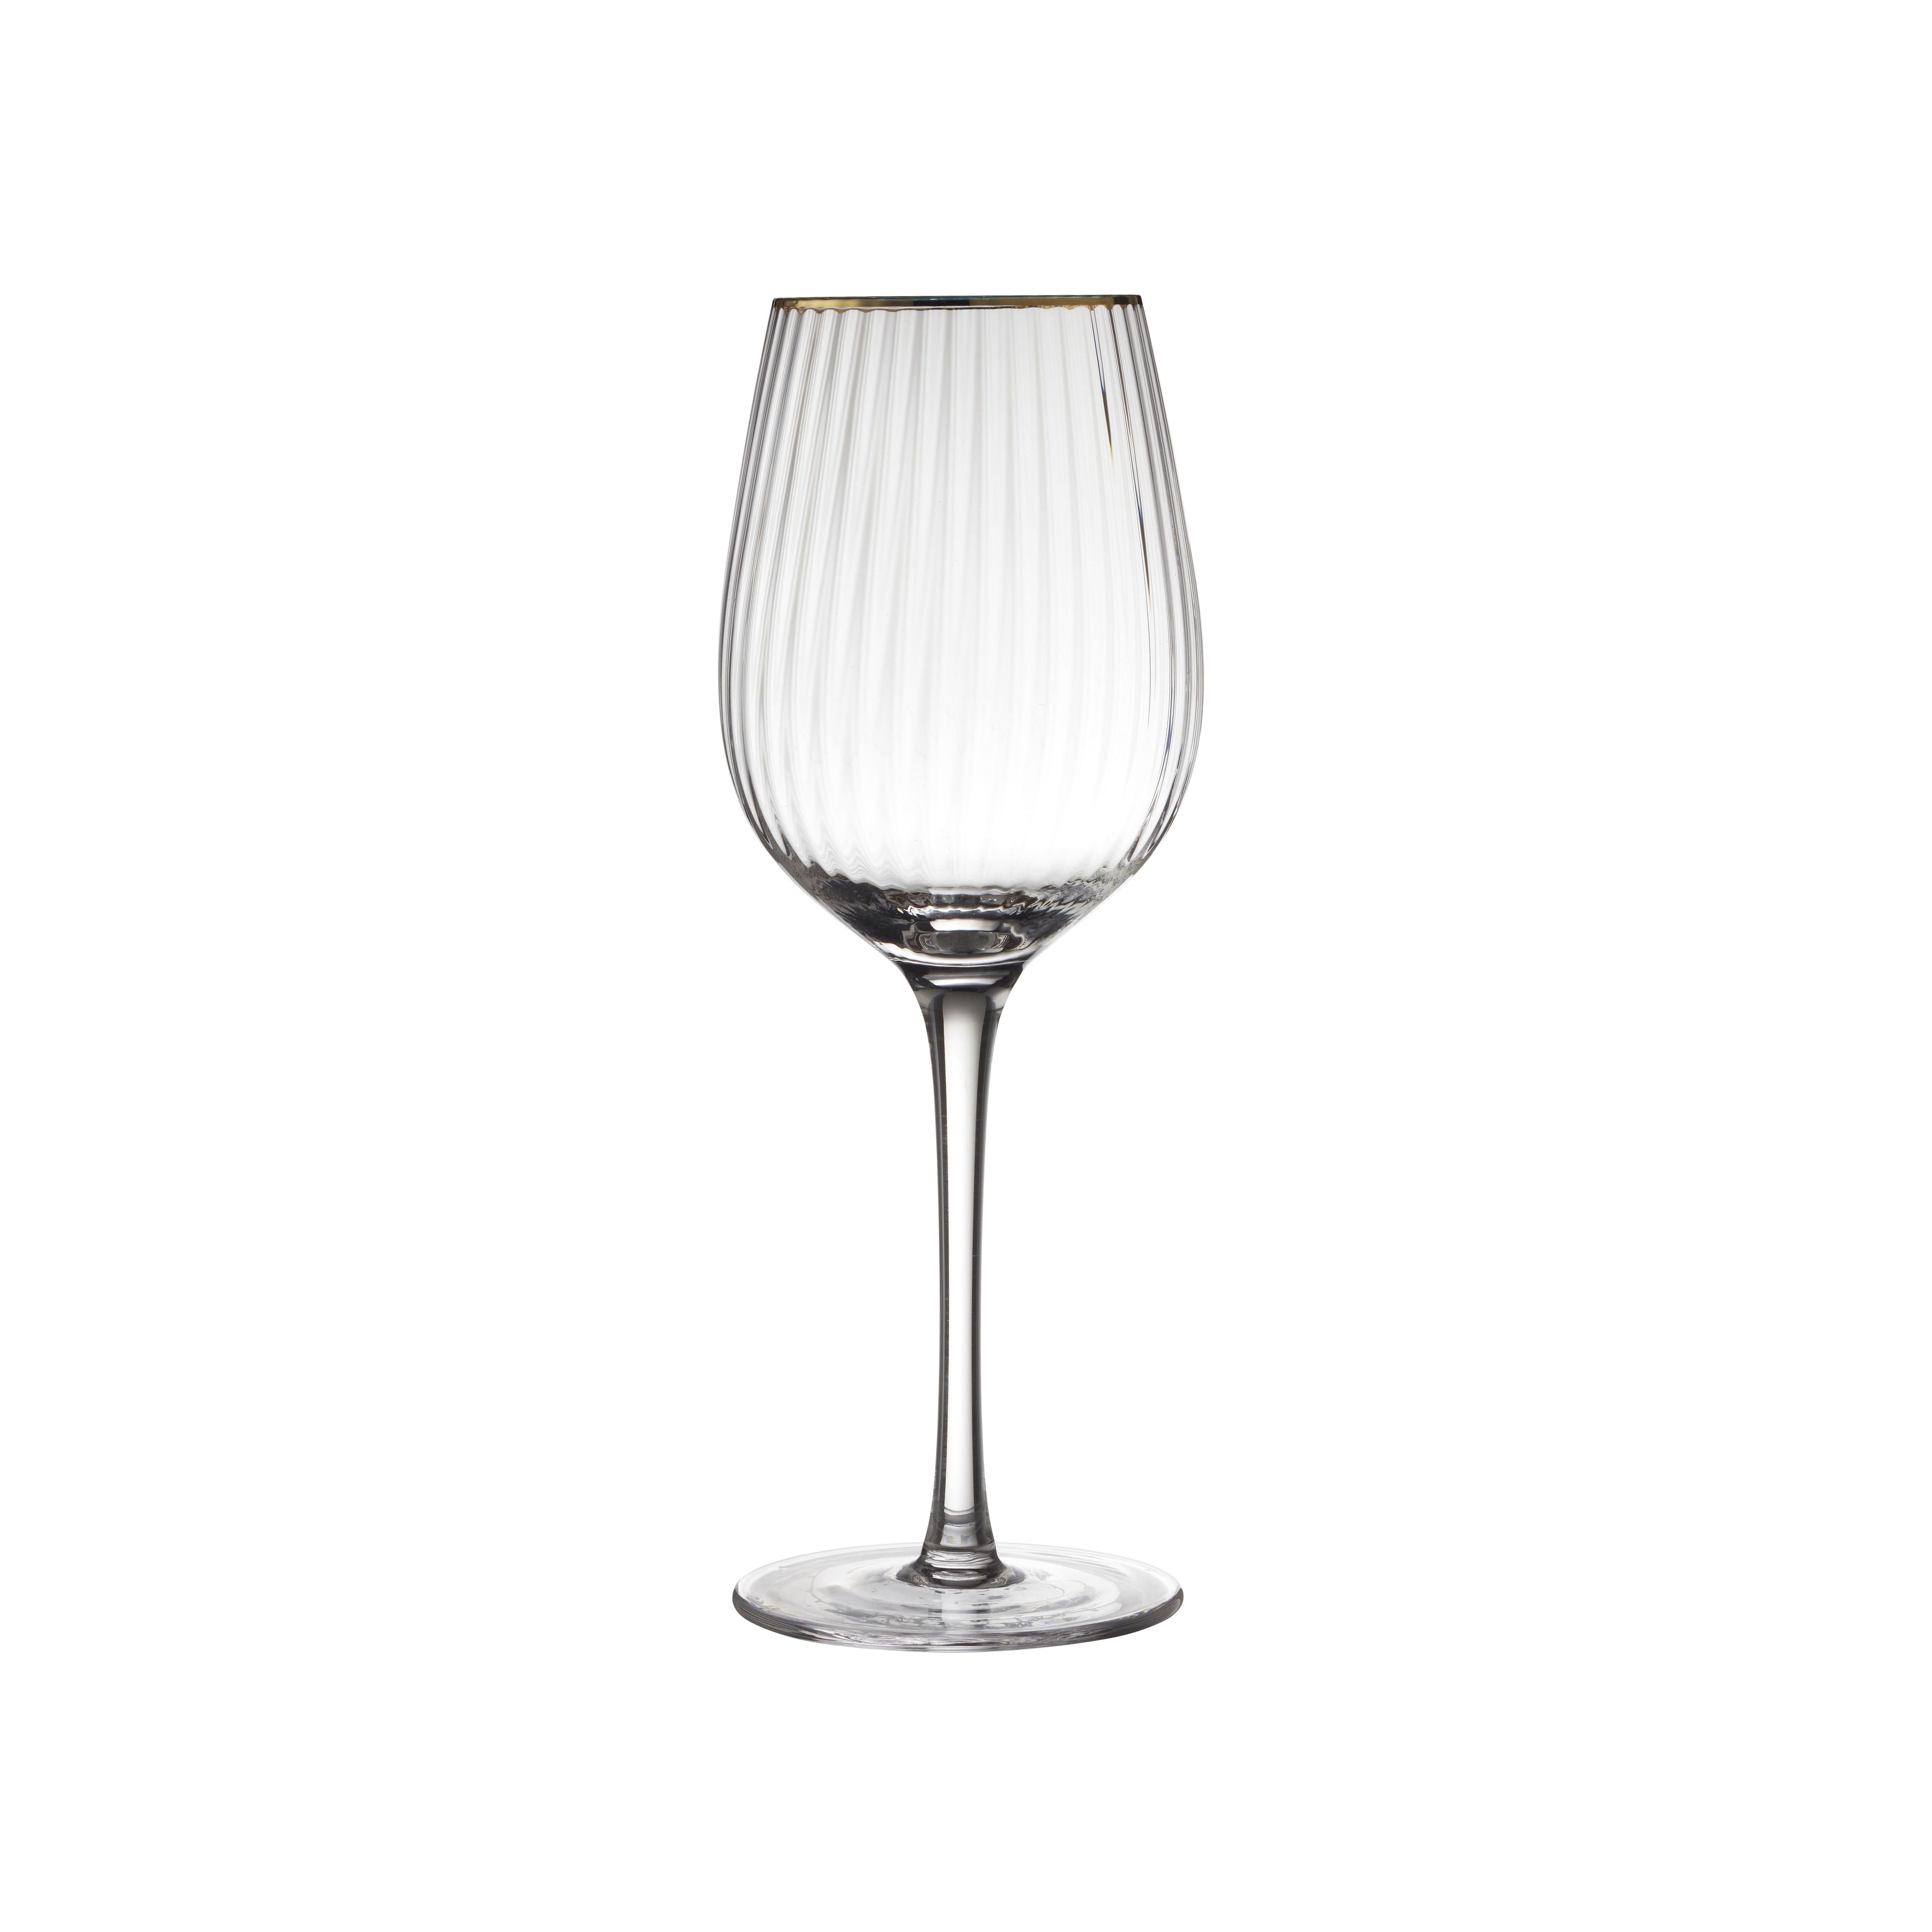 Lyngby Glas Palermo Gold Red Wine Glass 40 Cl 4 PC。